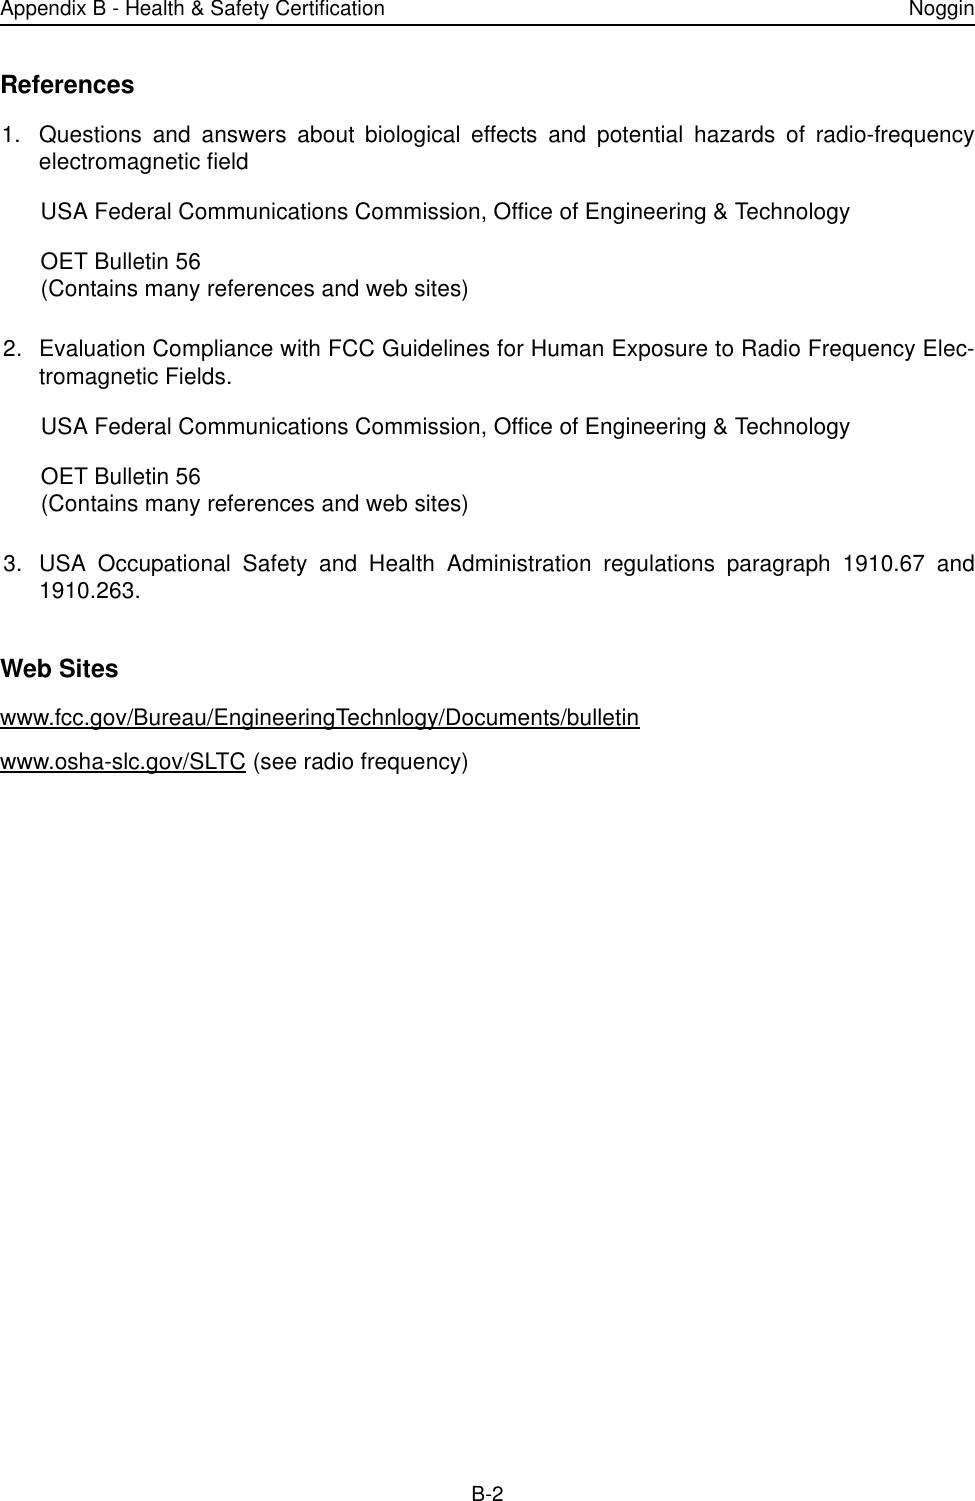 Appendix B - Health &amp; Safety Certification NogginB-2References1. Questions and answers about biological effects and potential hazards of radio-frequencyelectromagnetic fieldUSA Federal Communications Commission, Office of Engineering &amp; TechnologyOET Bulletin 56(Contains many references and web sites)2. Evaluation Compliance with FCC Guidelines for Human Exposure to Radio Frequency Elec-tromagnetic Fields.USA Federal Communications Commission, Office of Engineering &amp; TechnologyOET Bulletin 56(Contains many references and web sites)3. USA Occupational Safety and Health Administration regulations paragraph 1910.67 and1910.263.Web Siteswww.fcc.gov/Bureau/EngineeringTechnlogy/Documents/bulletin www.osha-slc.gov/SLTC (see radio frequency)